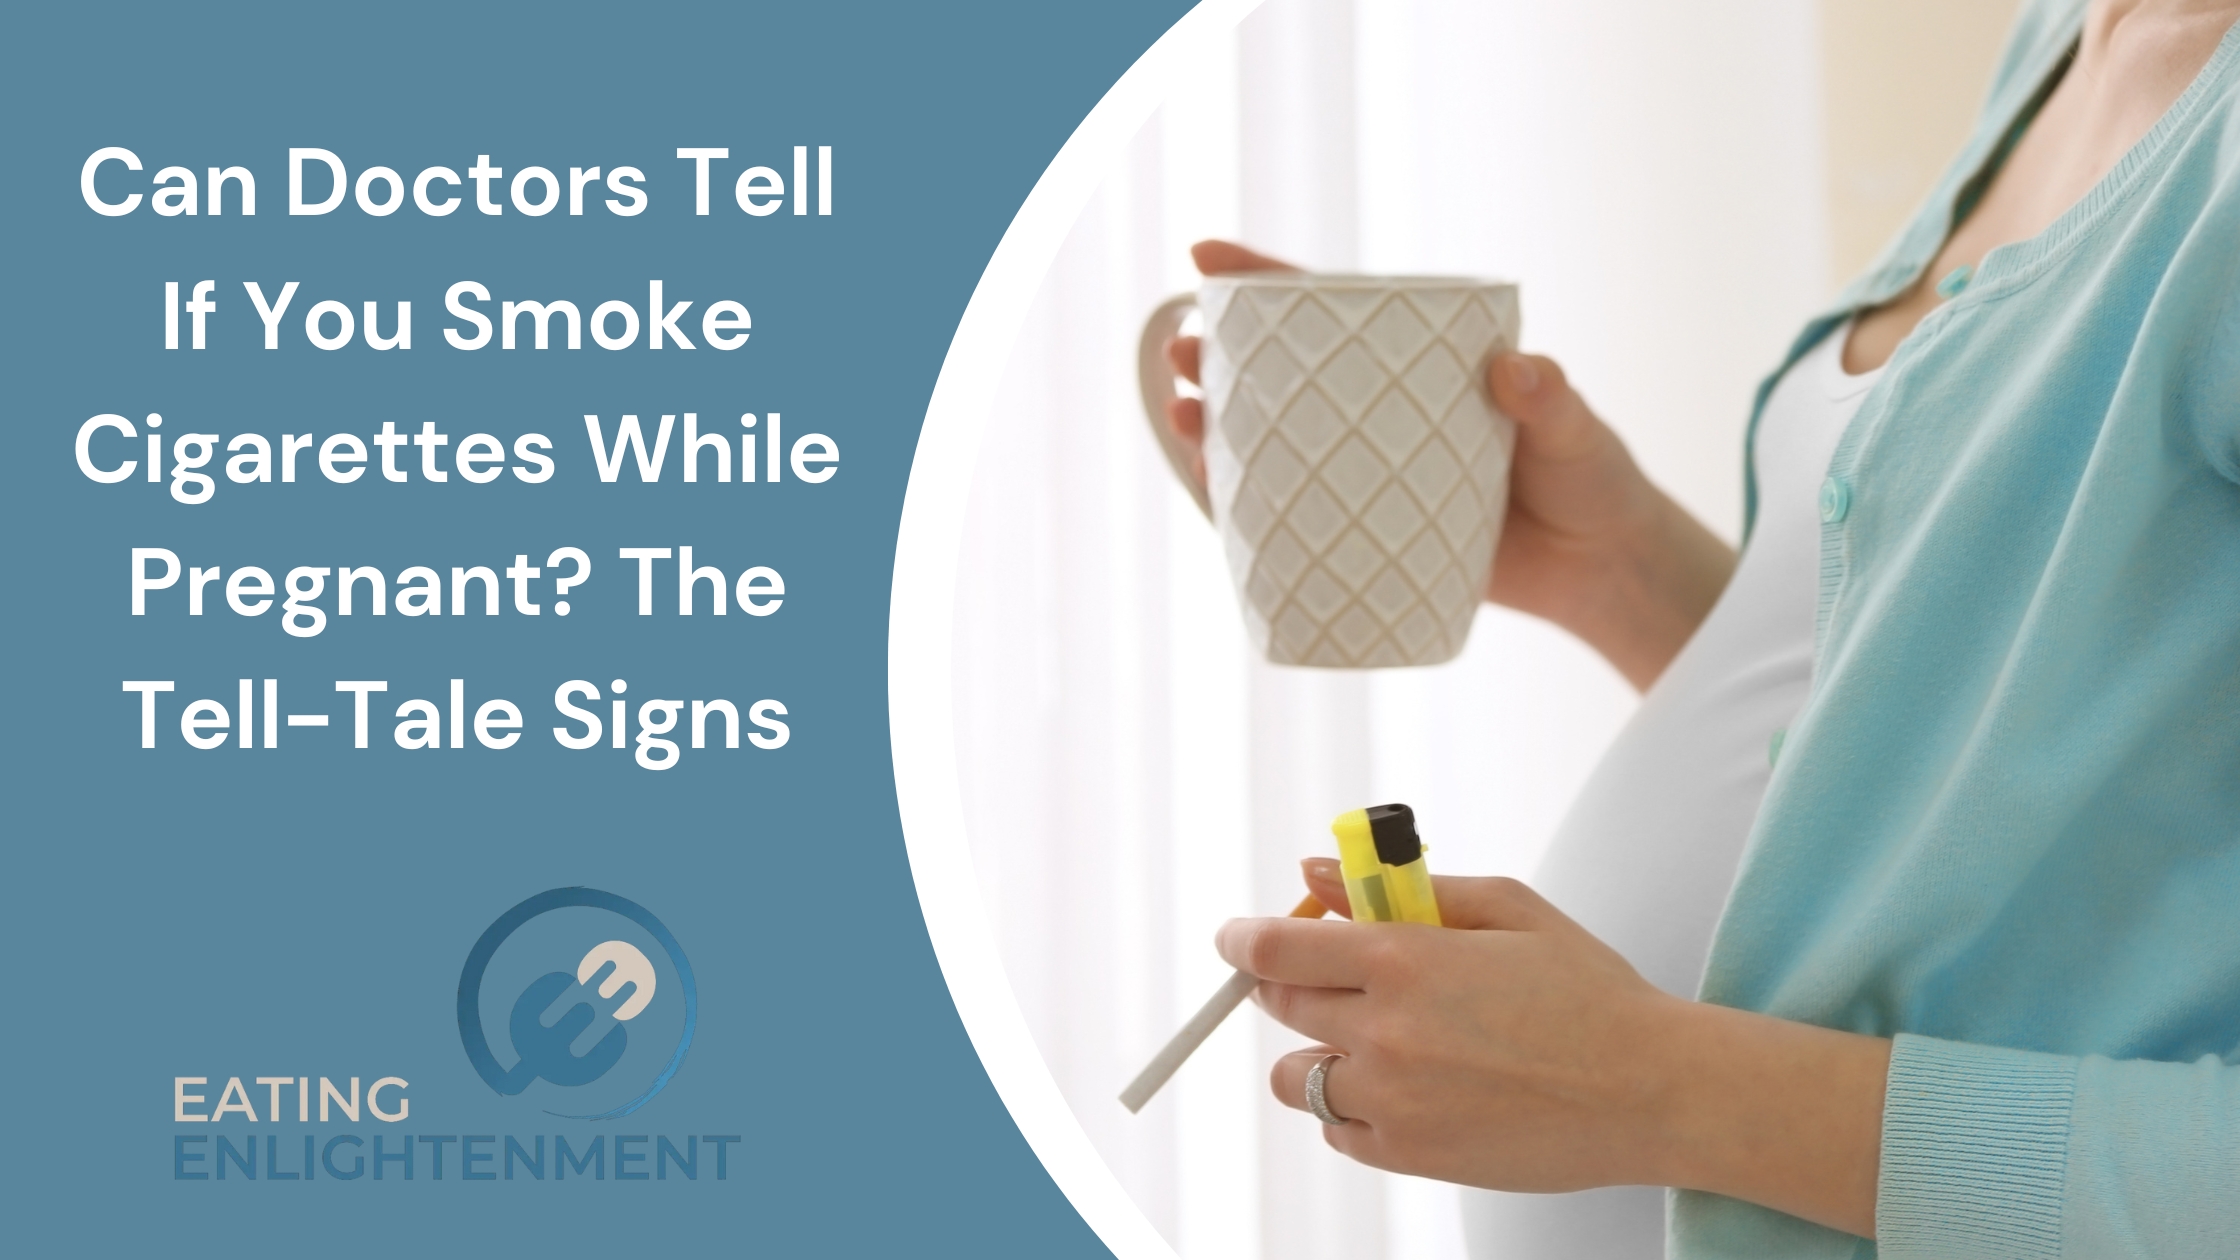 Can Doctors Tell If You Smoke Cigarettes While Pregnant? The Tell-Tale Signs